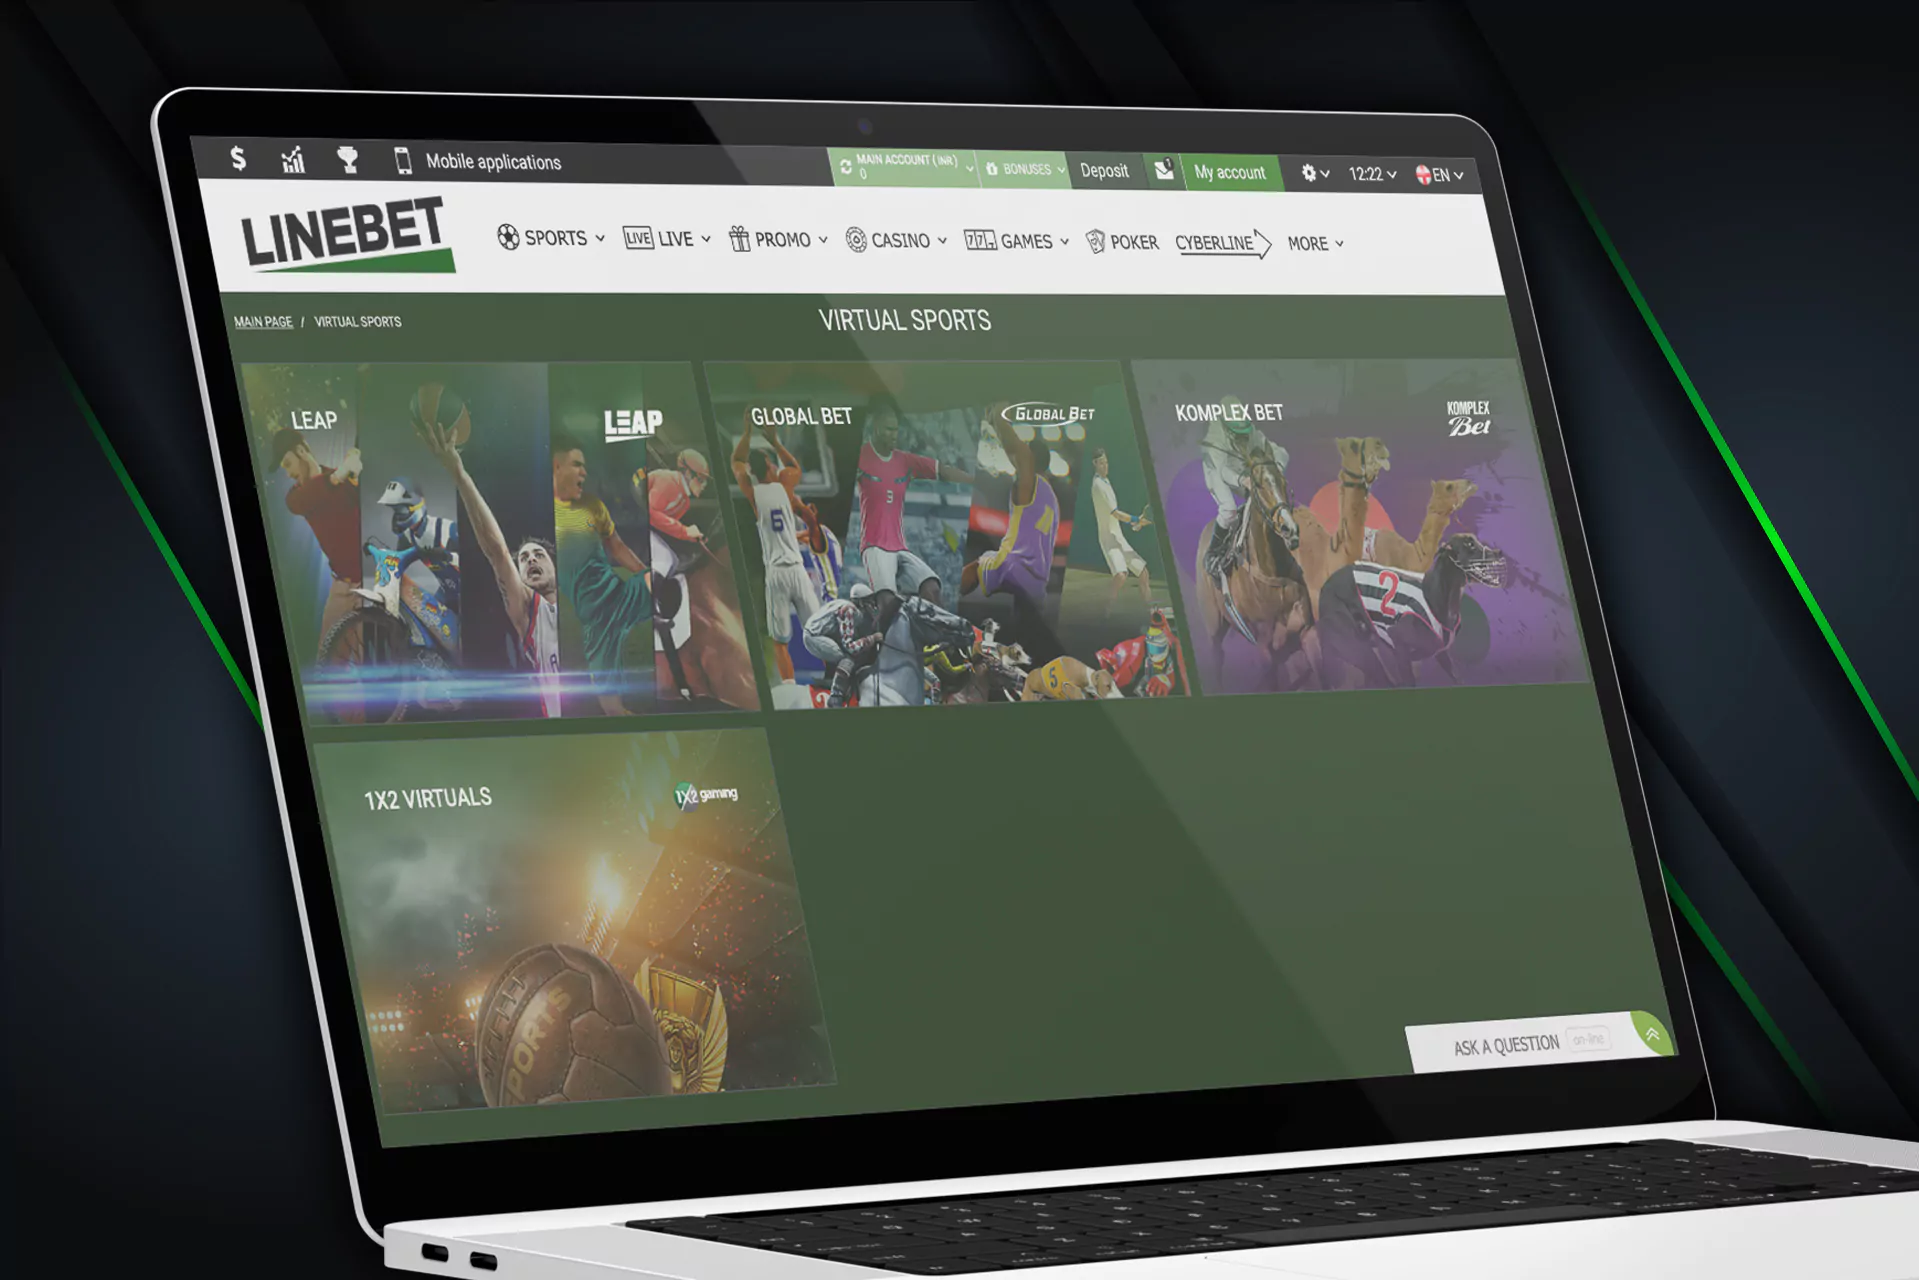 Except for cybersports you can bet on various virtual sports at Linebet.